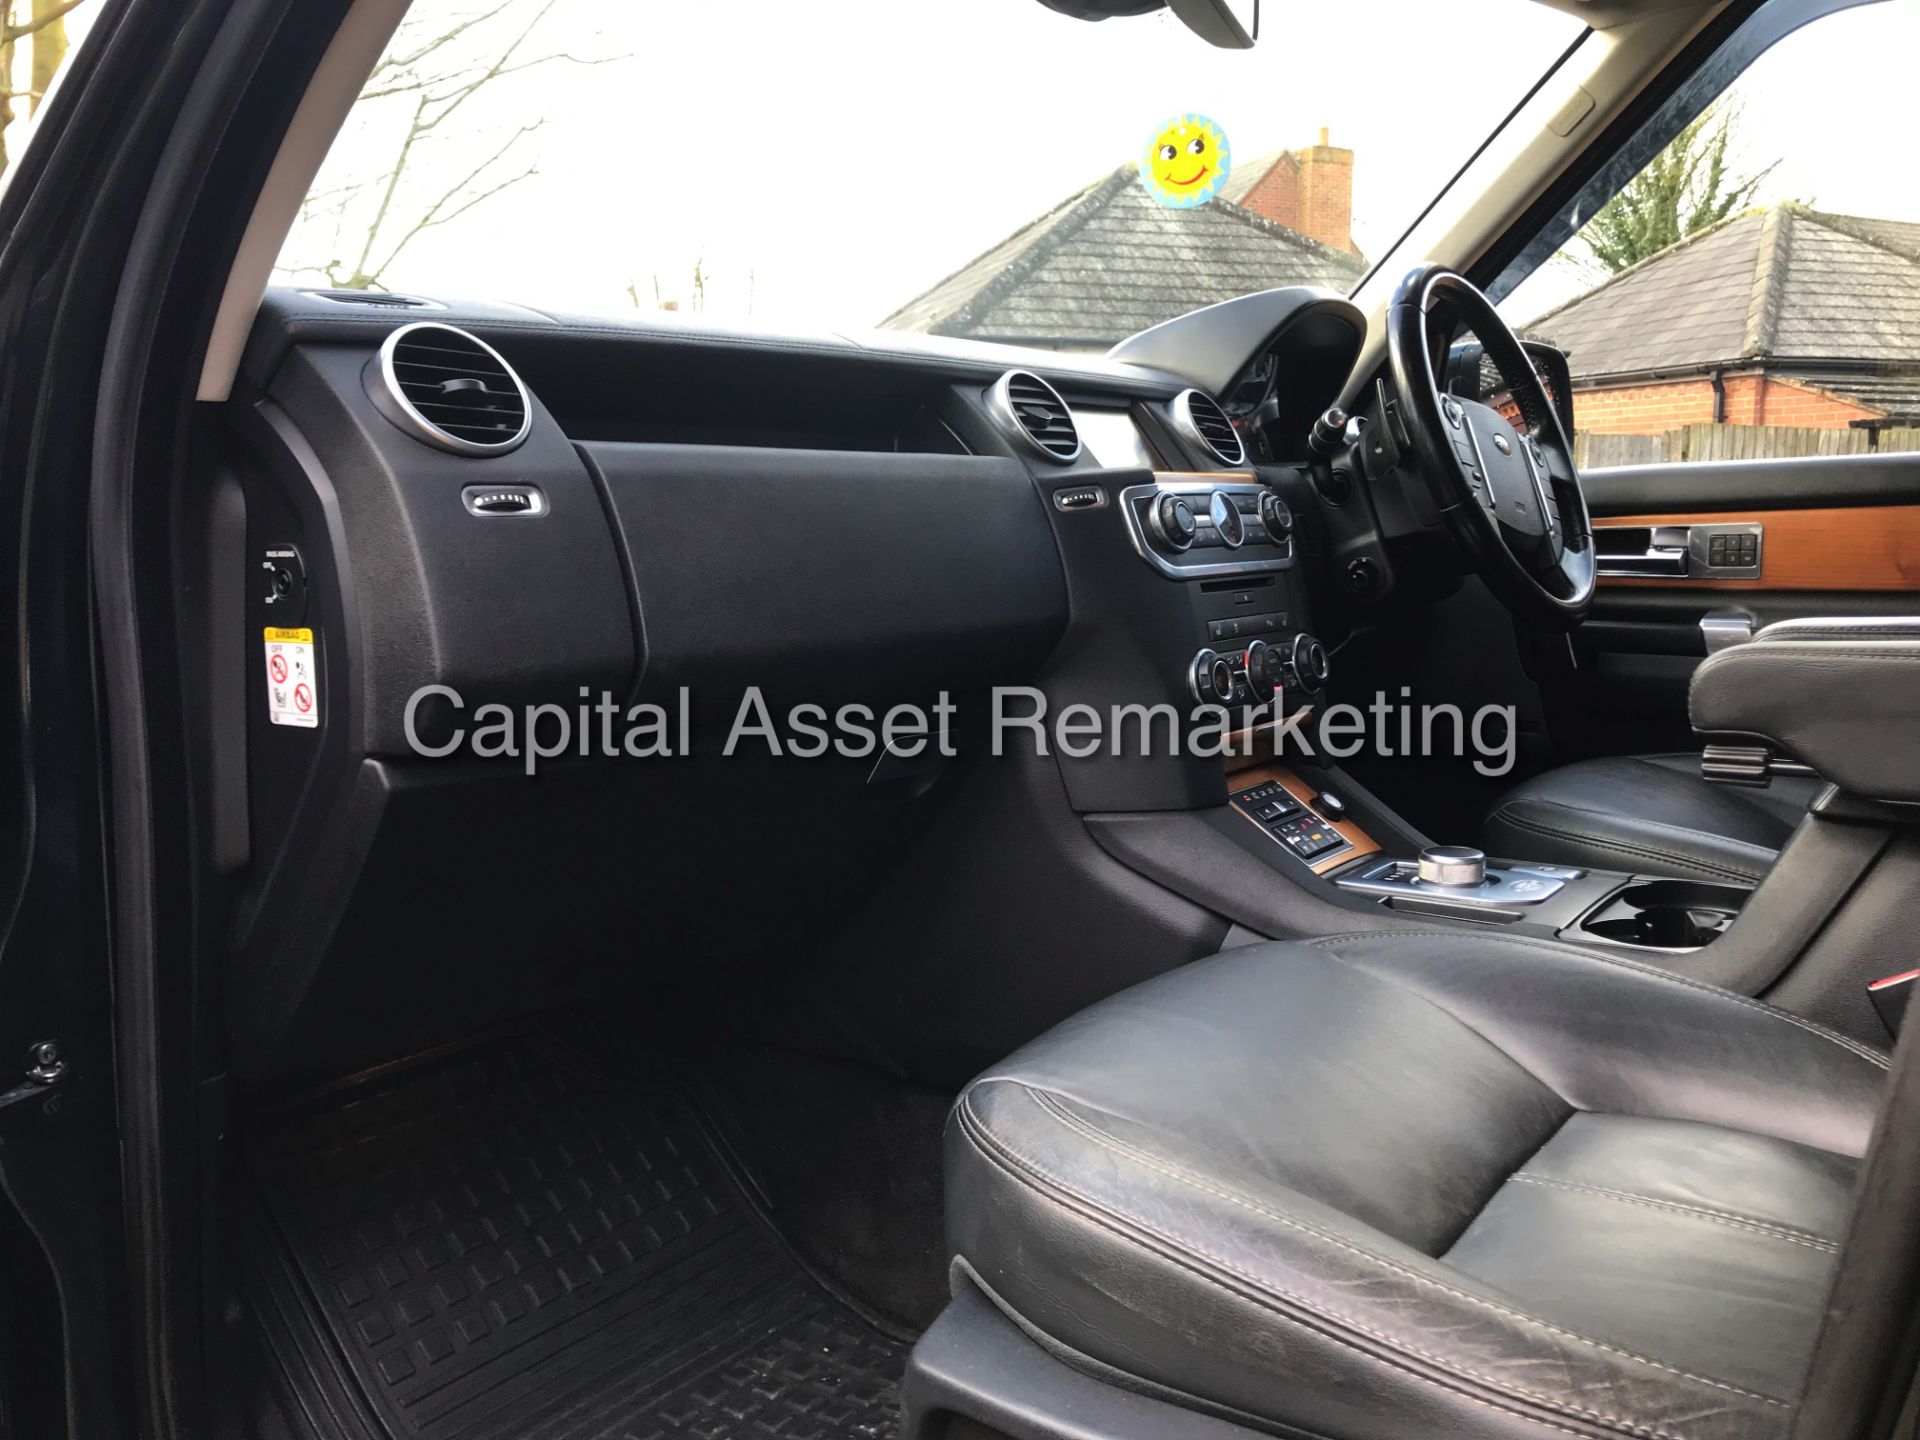 LAND ROVER DISCOVERY 4 "HSE" 3.0 SDV6 AUTOMATIC (13 REG) 7 SEATER - FULL LEATHER - SAT NAV *LOOK* - Image 13 of 25